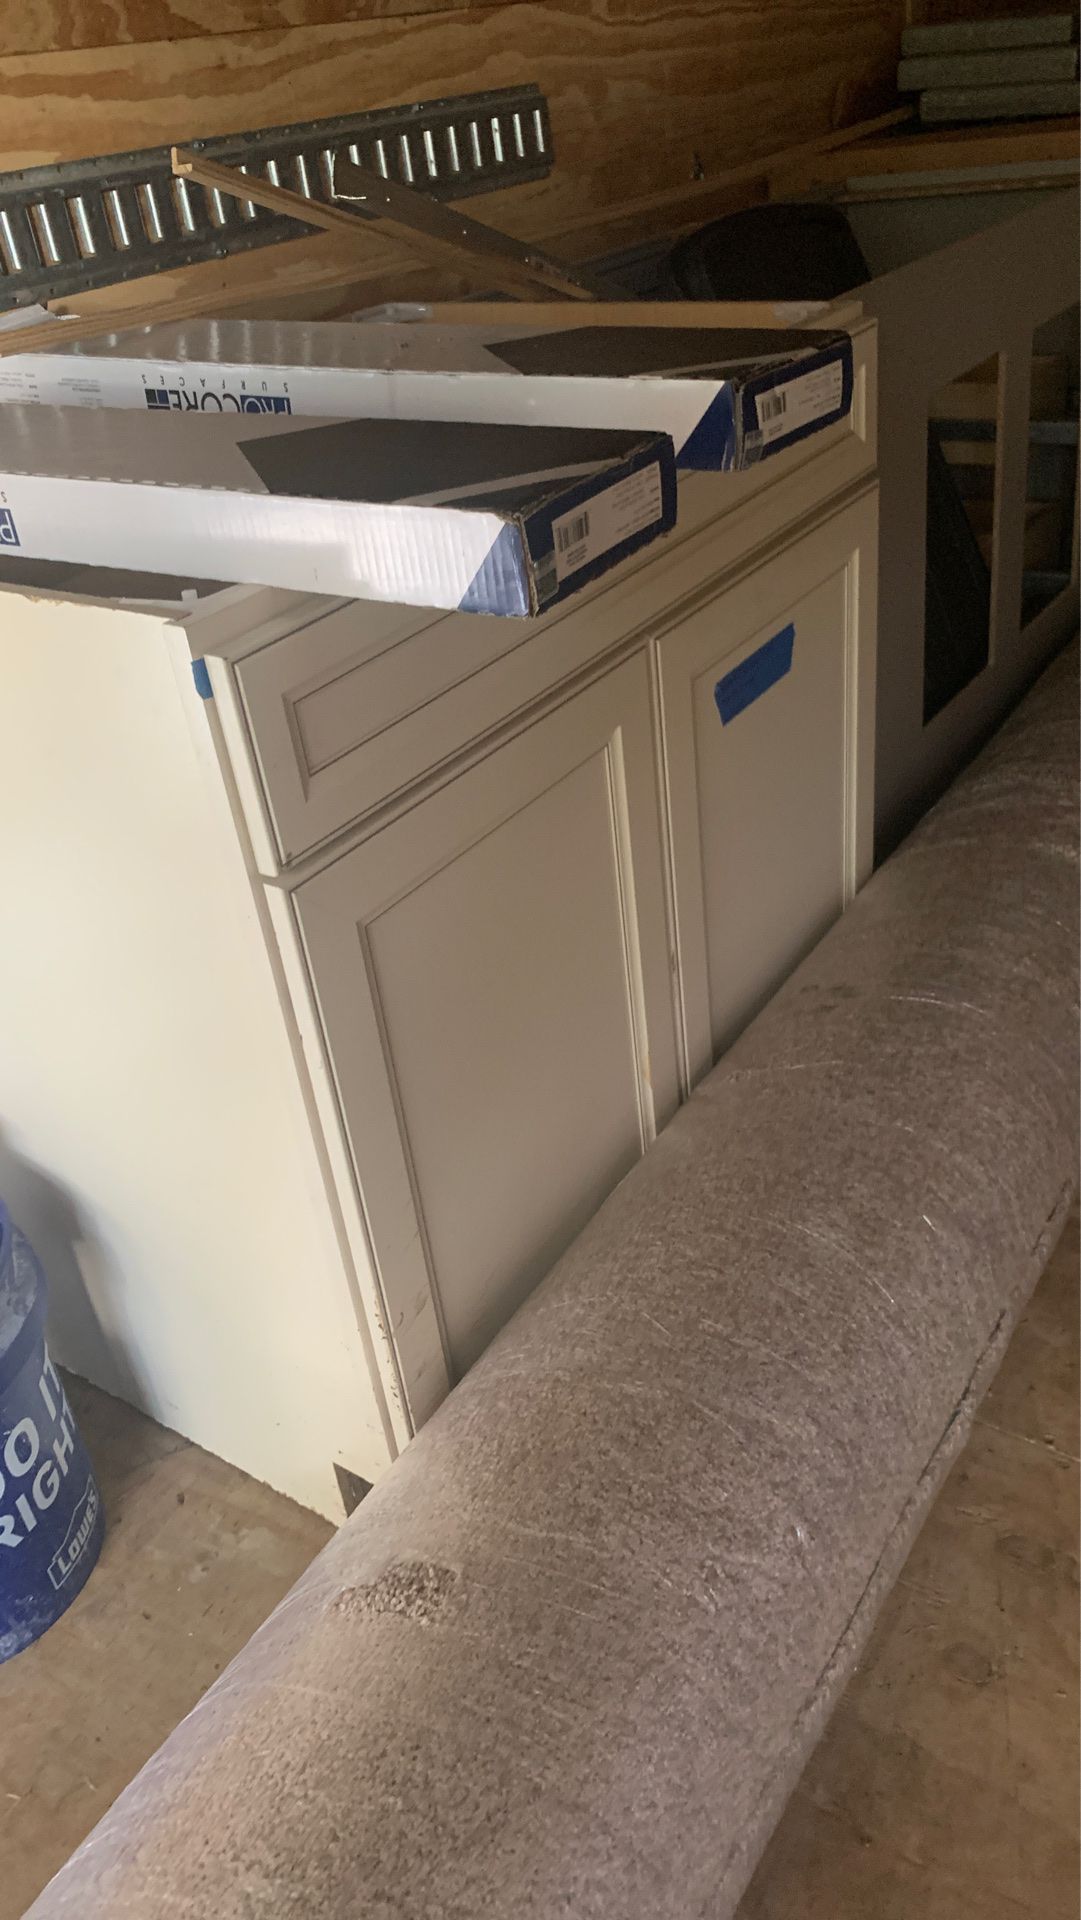 Kitchen cabinets 2 36” 24” and 30”lowers